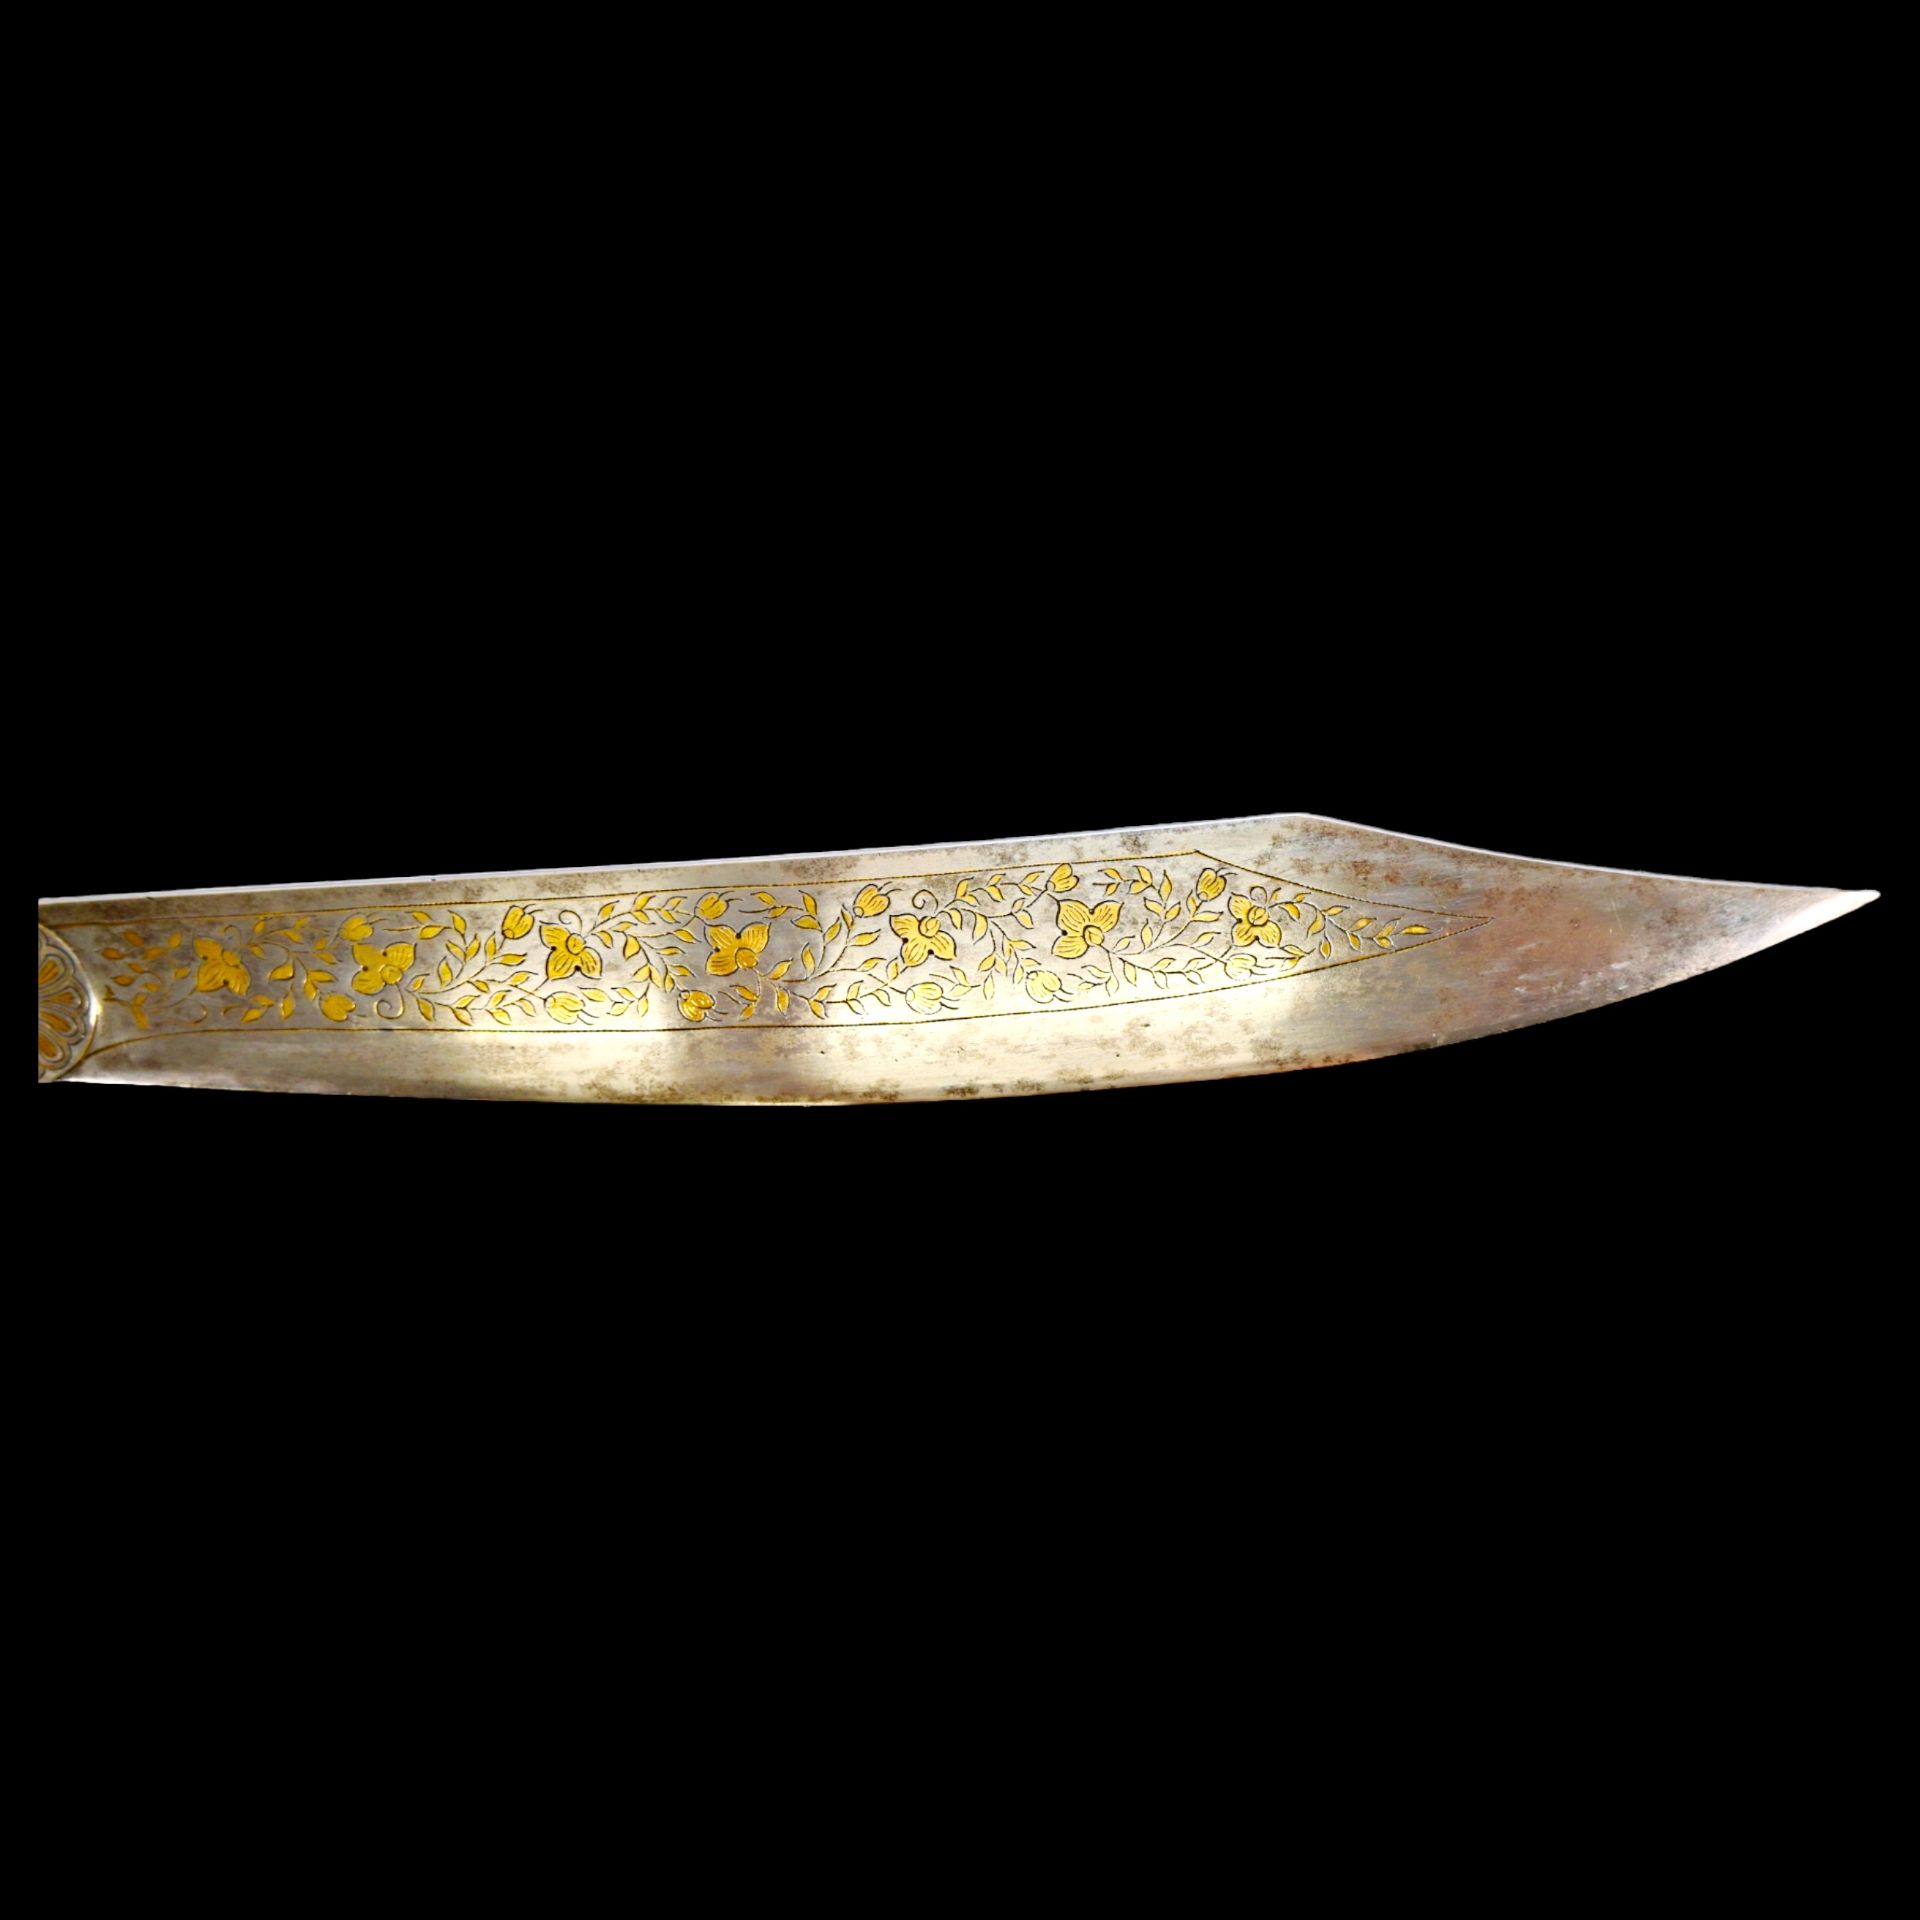 Magnificent, richly decorated knife, Indonesia, first half of the 20th century. - Image 16 of 33